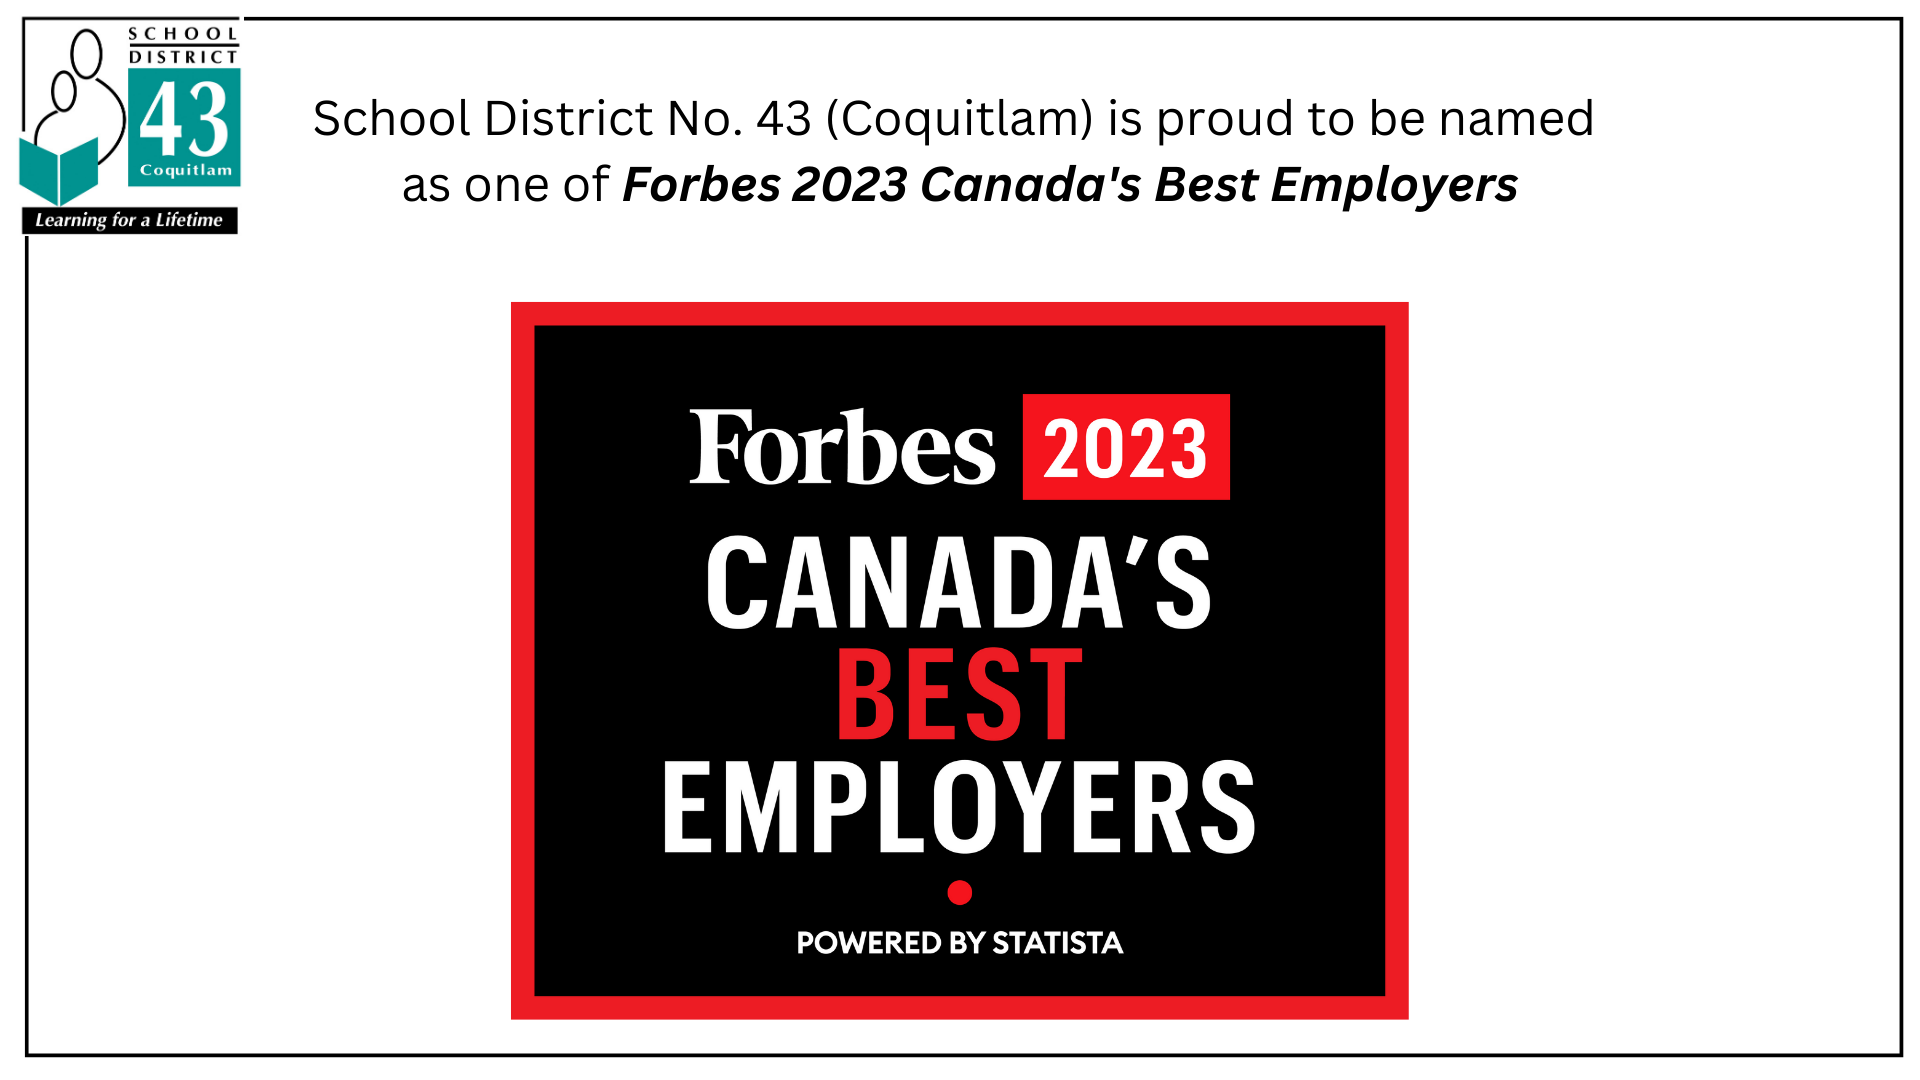 SD43 named a Forbes Canada Best Employer for 2023